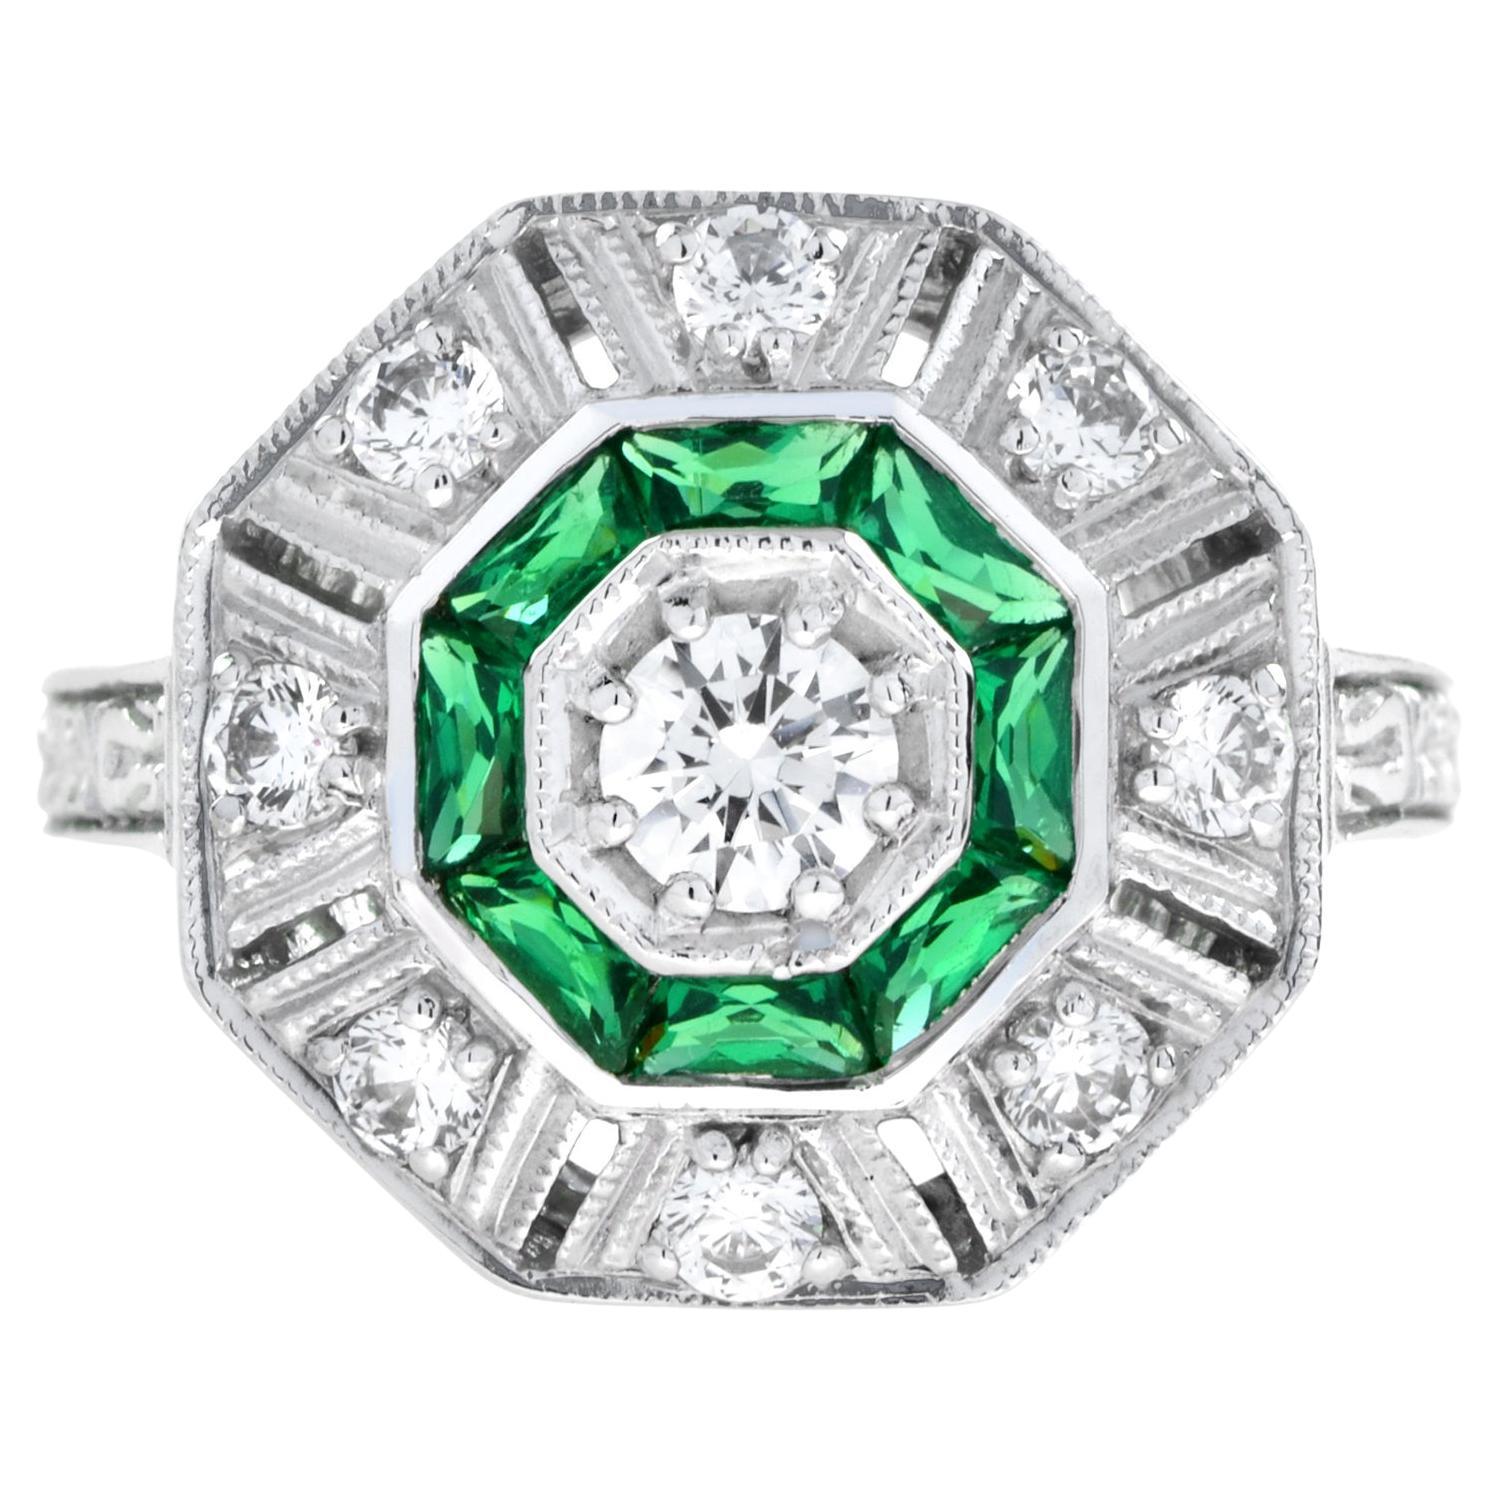 Diamond and Emerald Art Deco Style Octagon Target Ring in 18K White Gold 